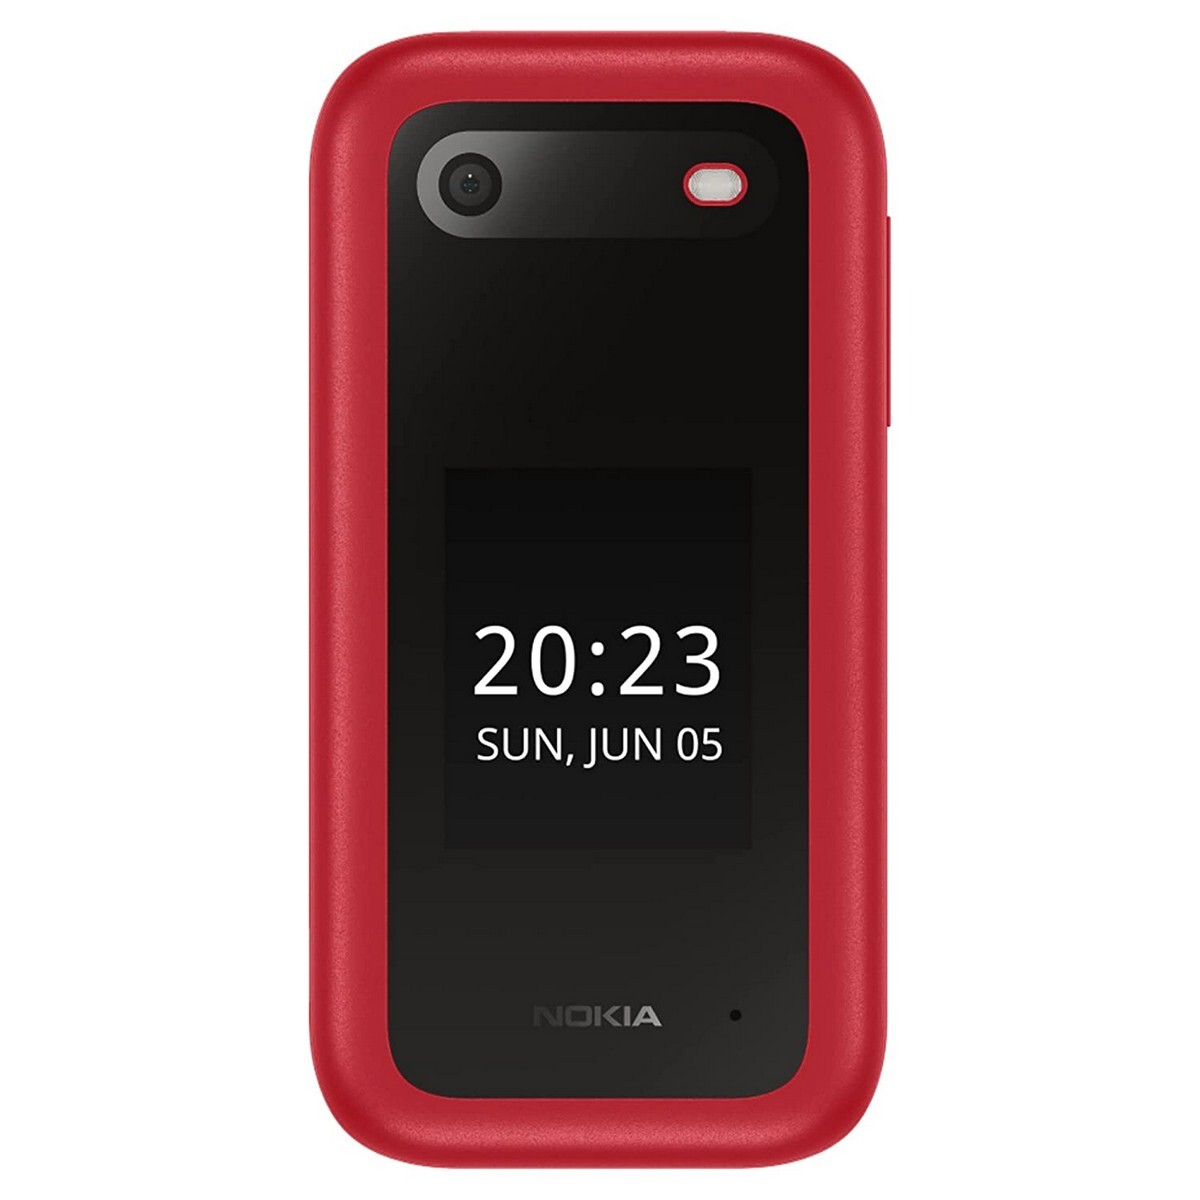 Nokia Mobile Phone 2660 Flip DS Red